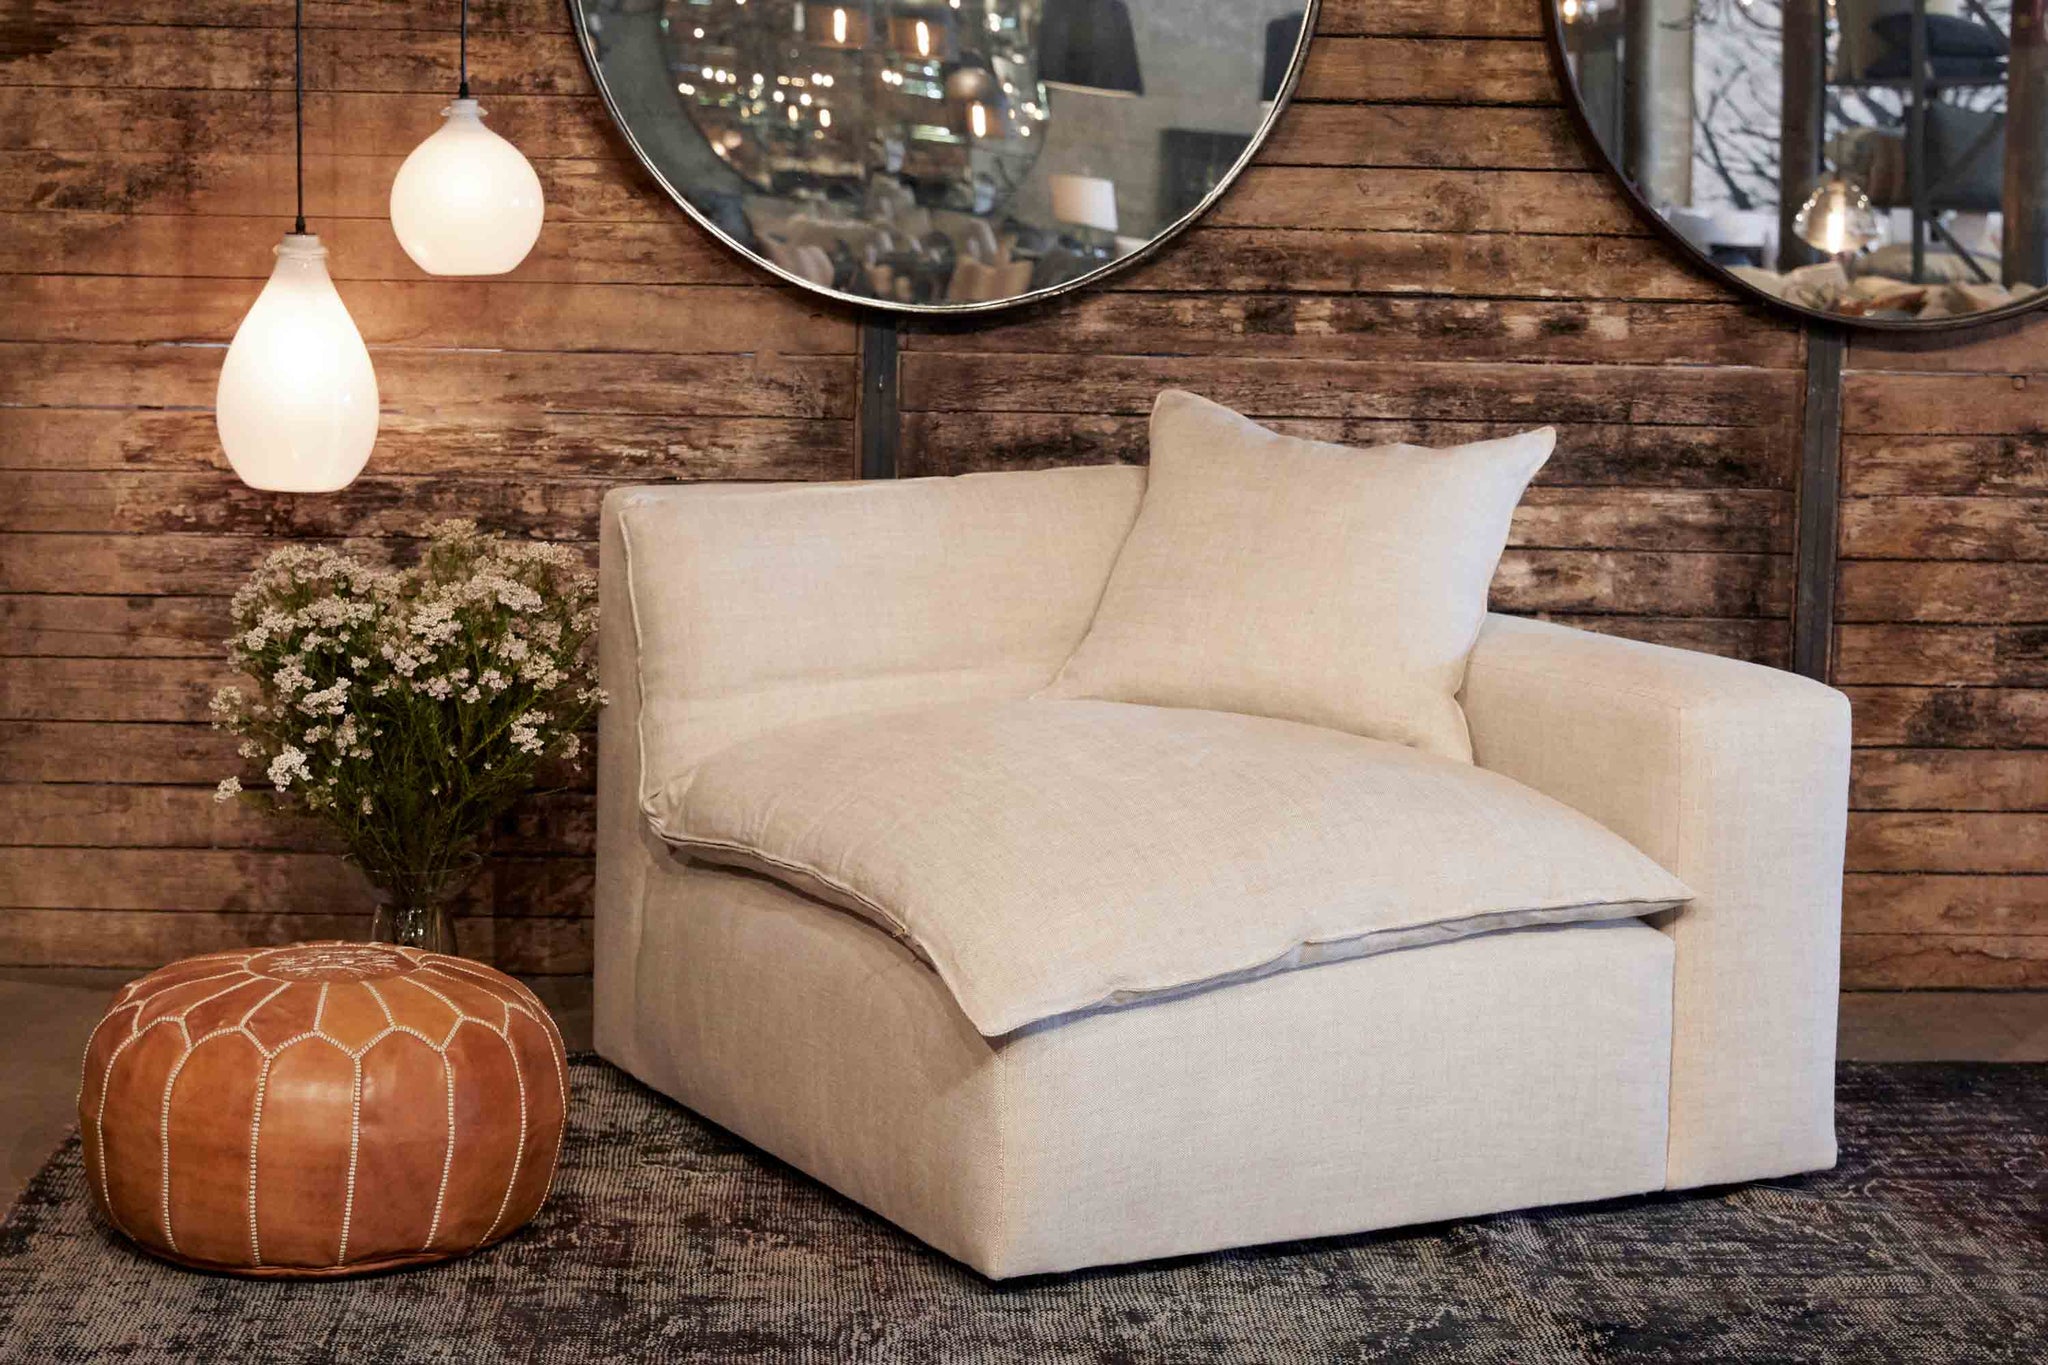  Upholstered corner sofa piece in light neutral fabric with leather ottoman and one jug oval lamp and jug lamp in snow finish. Wood wall with two round wall mirrors.  